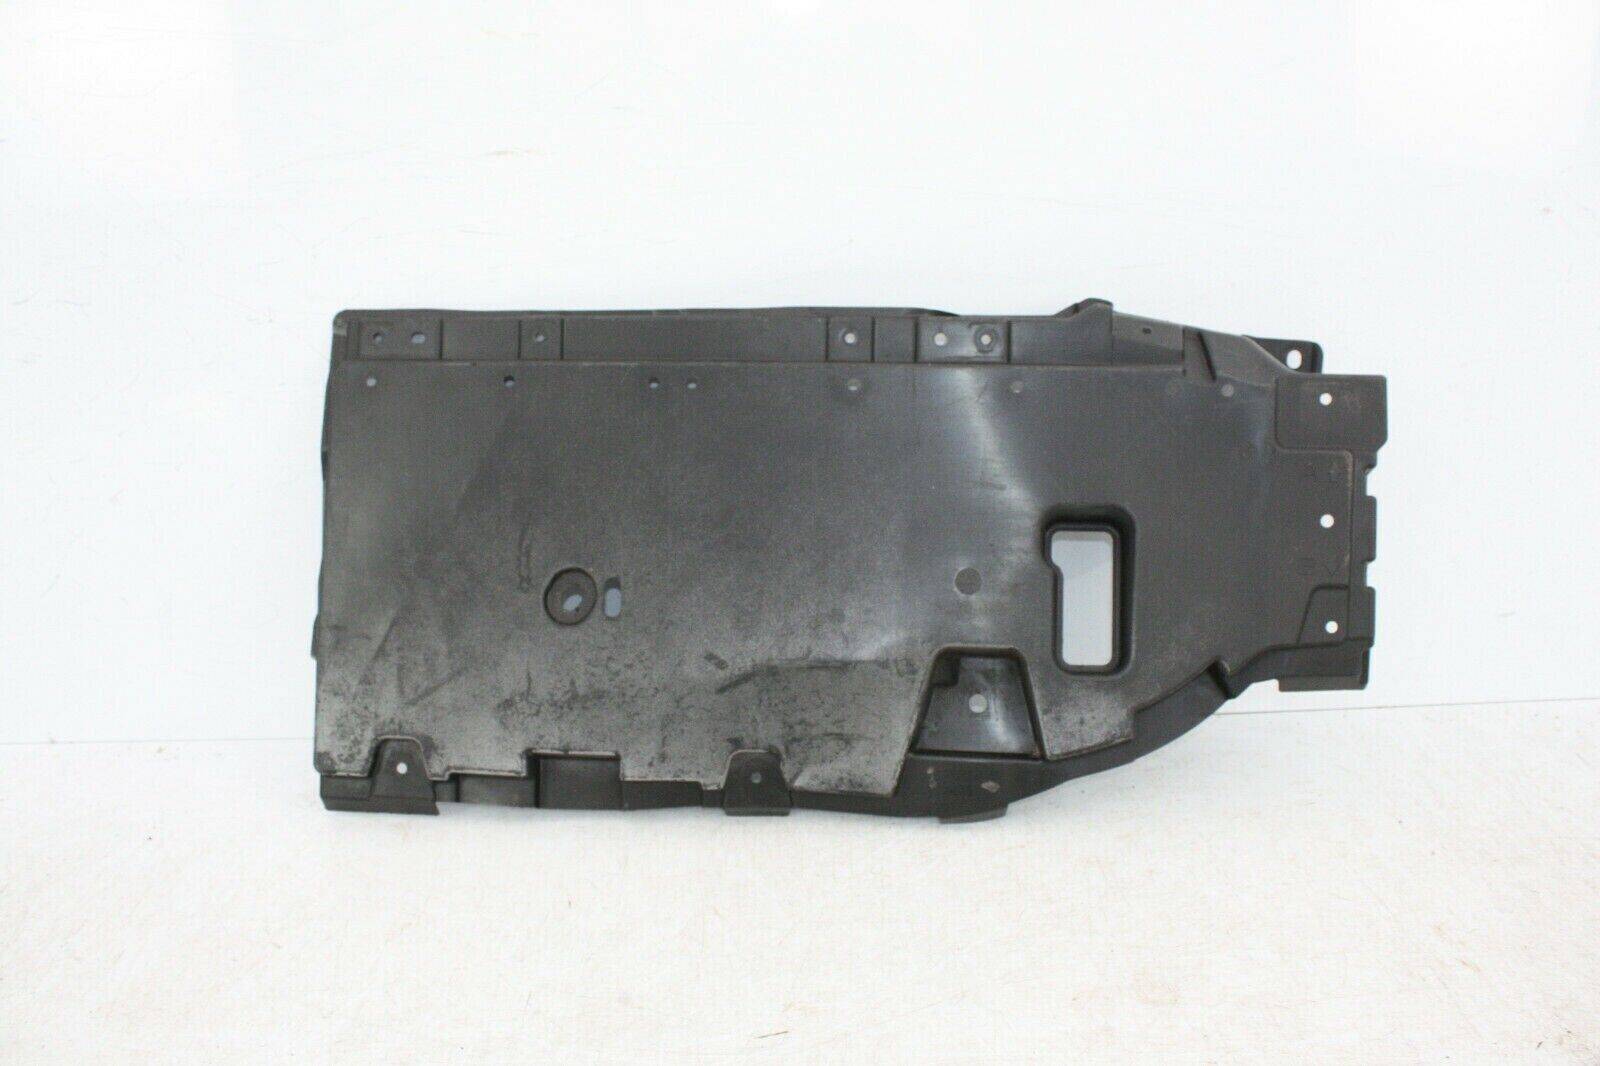 Toyota-prius-Rear-middle-underbody-tray-cover-58308-47011-175407786485